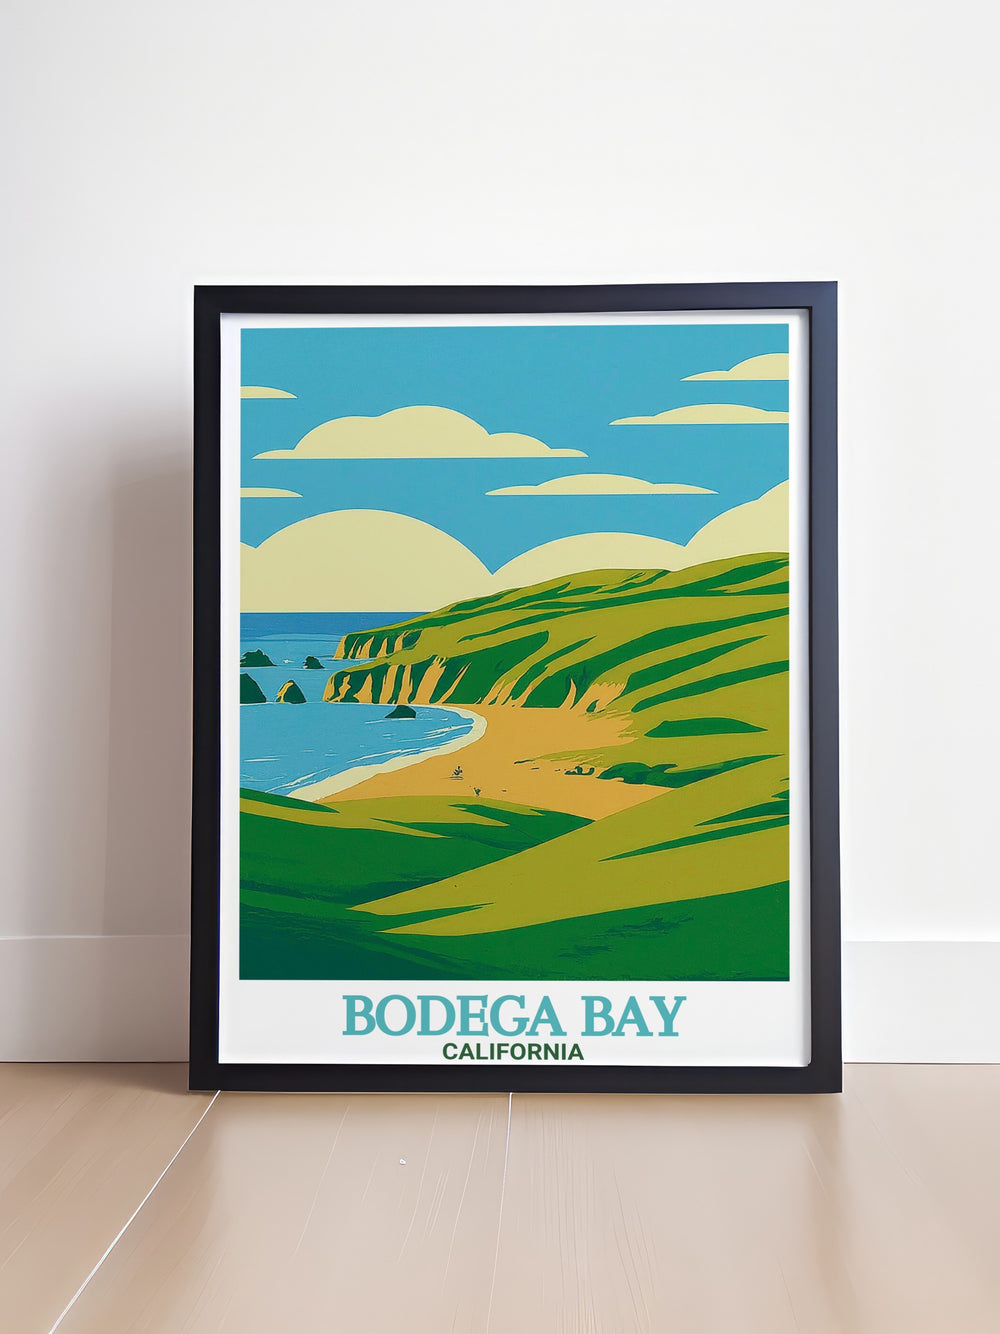 Bodega Bay art print showcasing a breathtaking view of the cliffs and ocean waves at Doran Regional Park. Ideal for creating a calming and beautiful atmosphere in any room with a focus on Californias natural beauty.